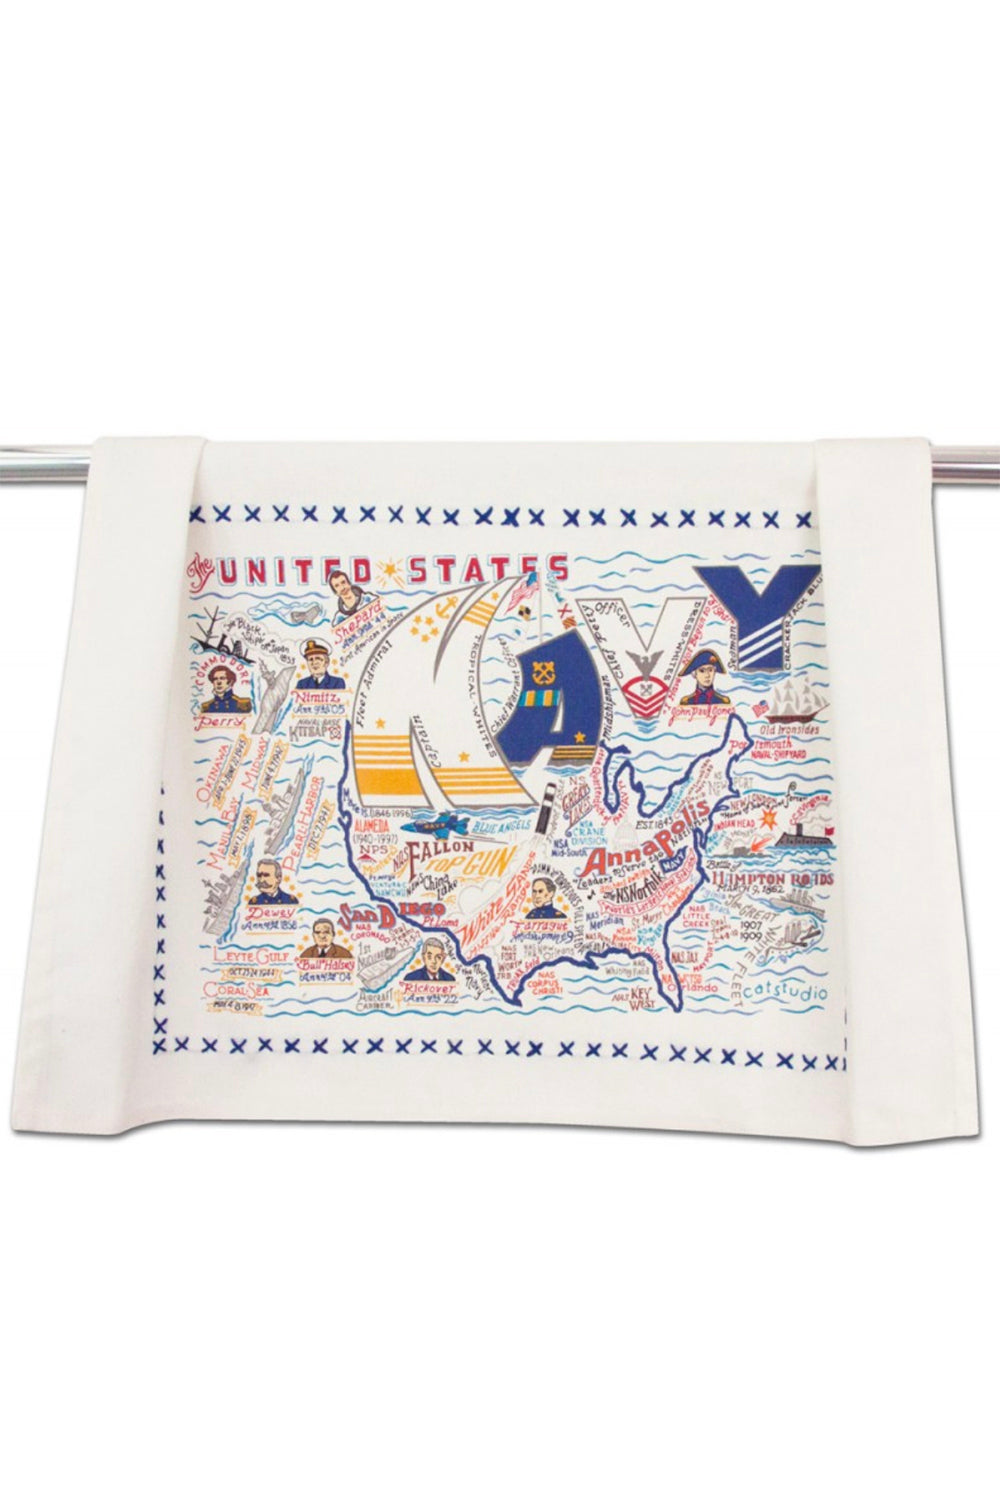 CS Embroidered Dish Towel  - United States Navy